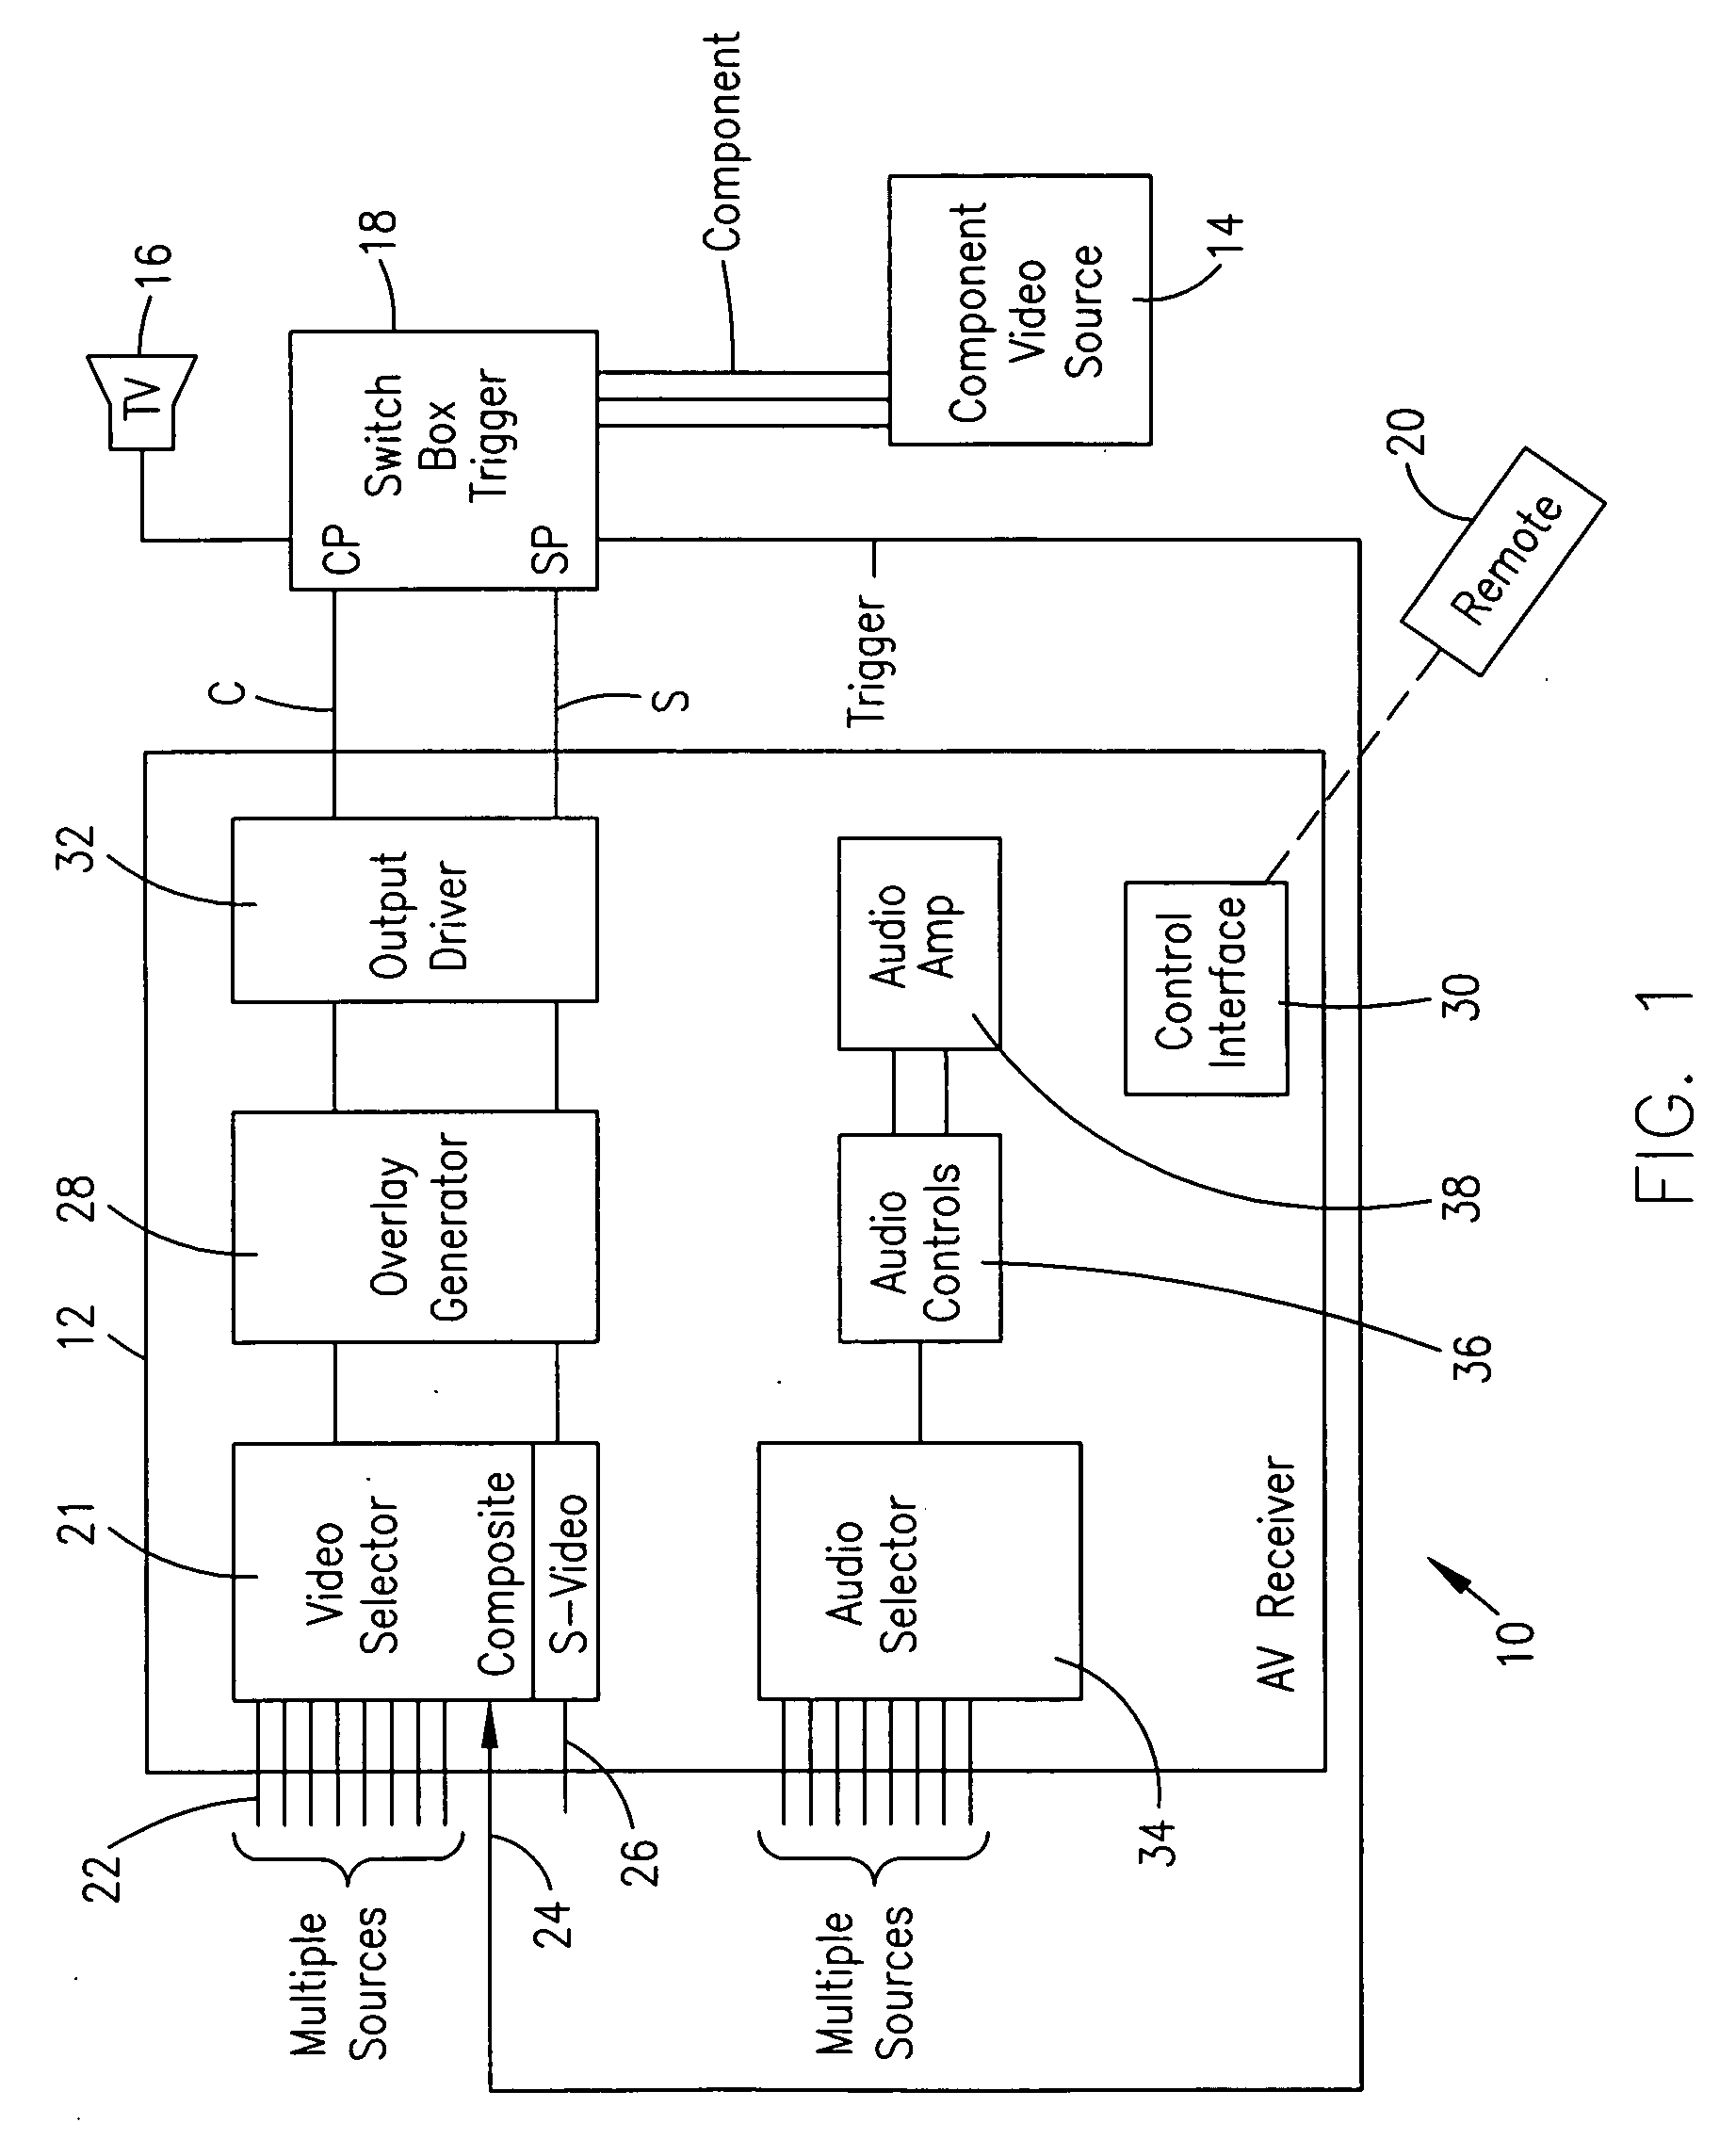 Method and apparatus for automatic selection of video interface